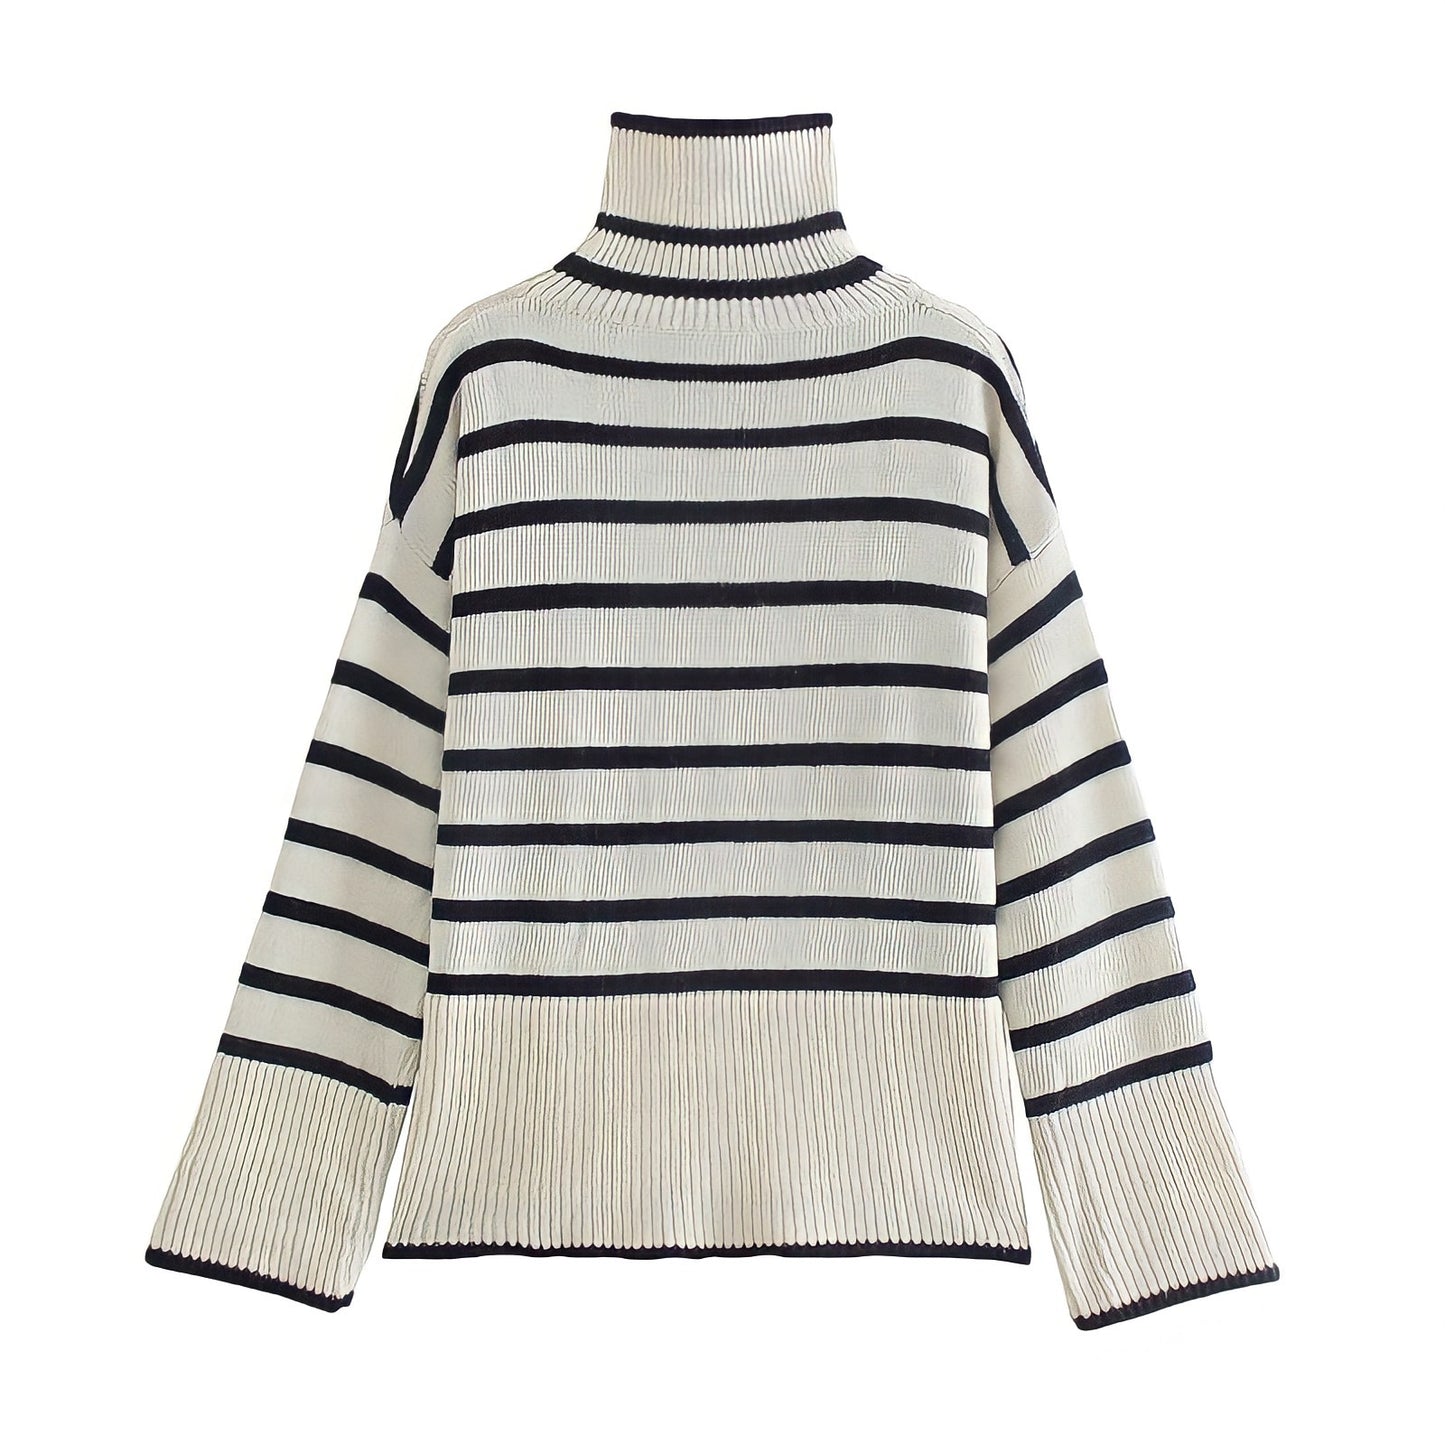 White Striped Knitted Turtleneck Sweater